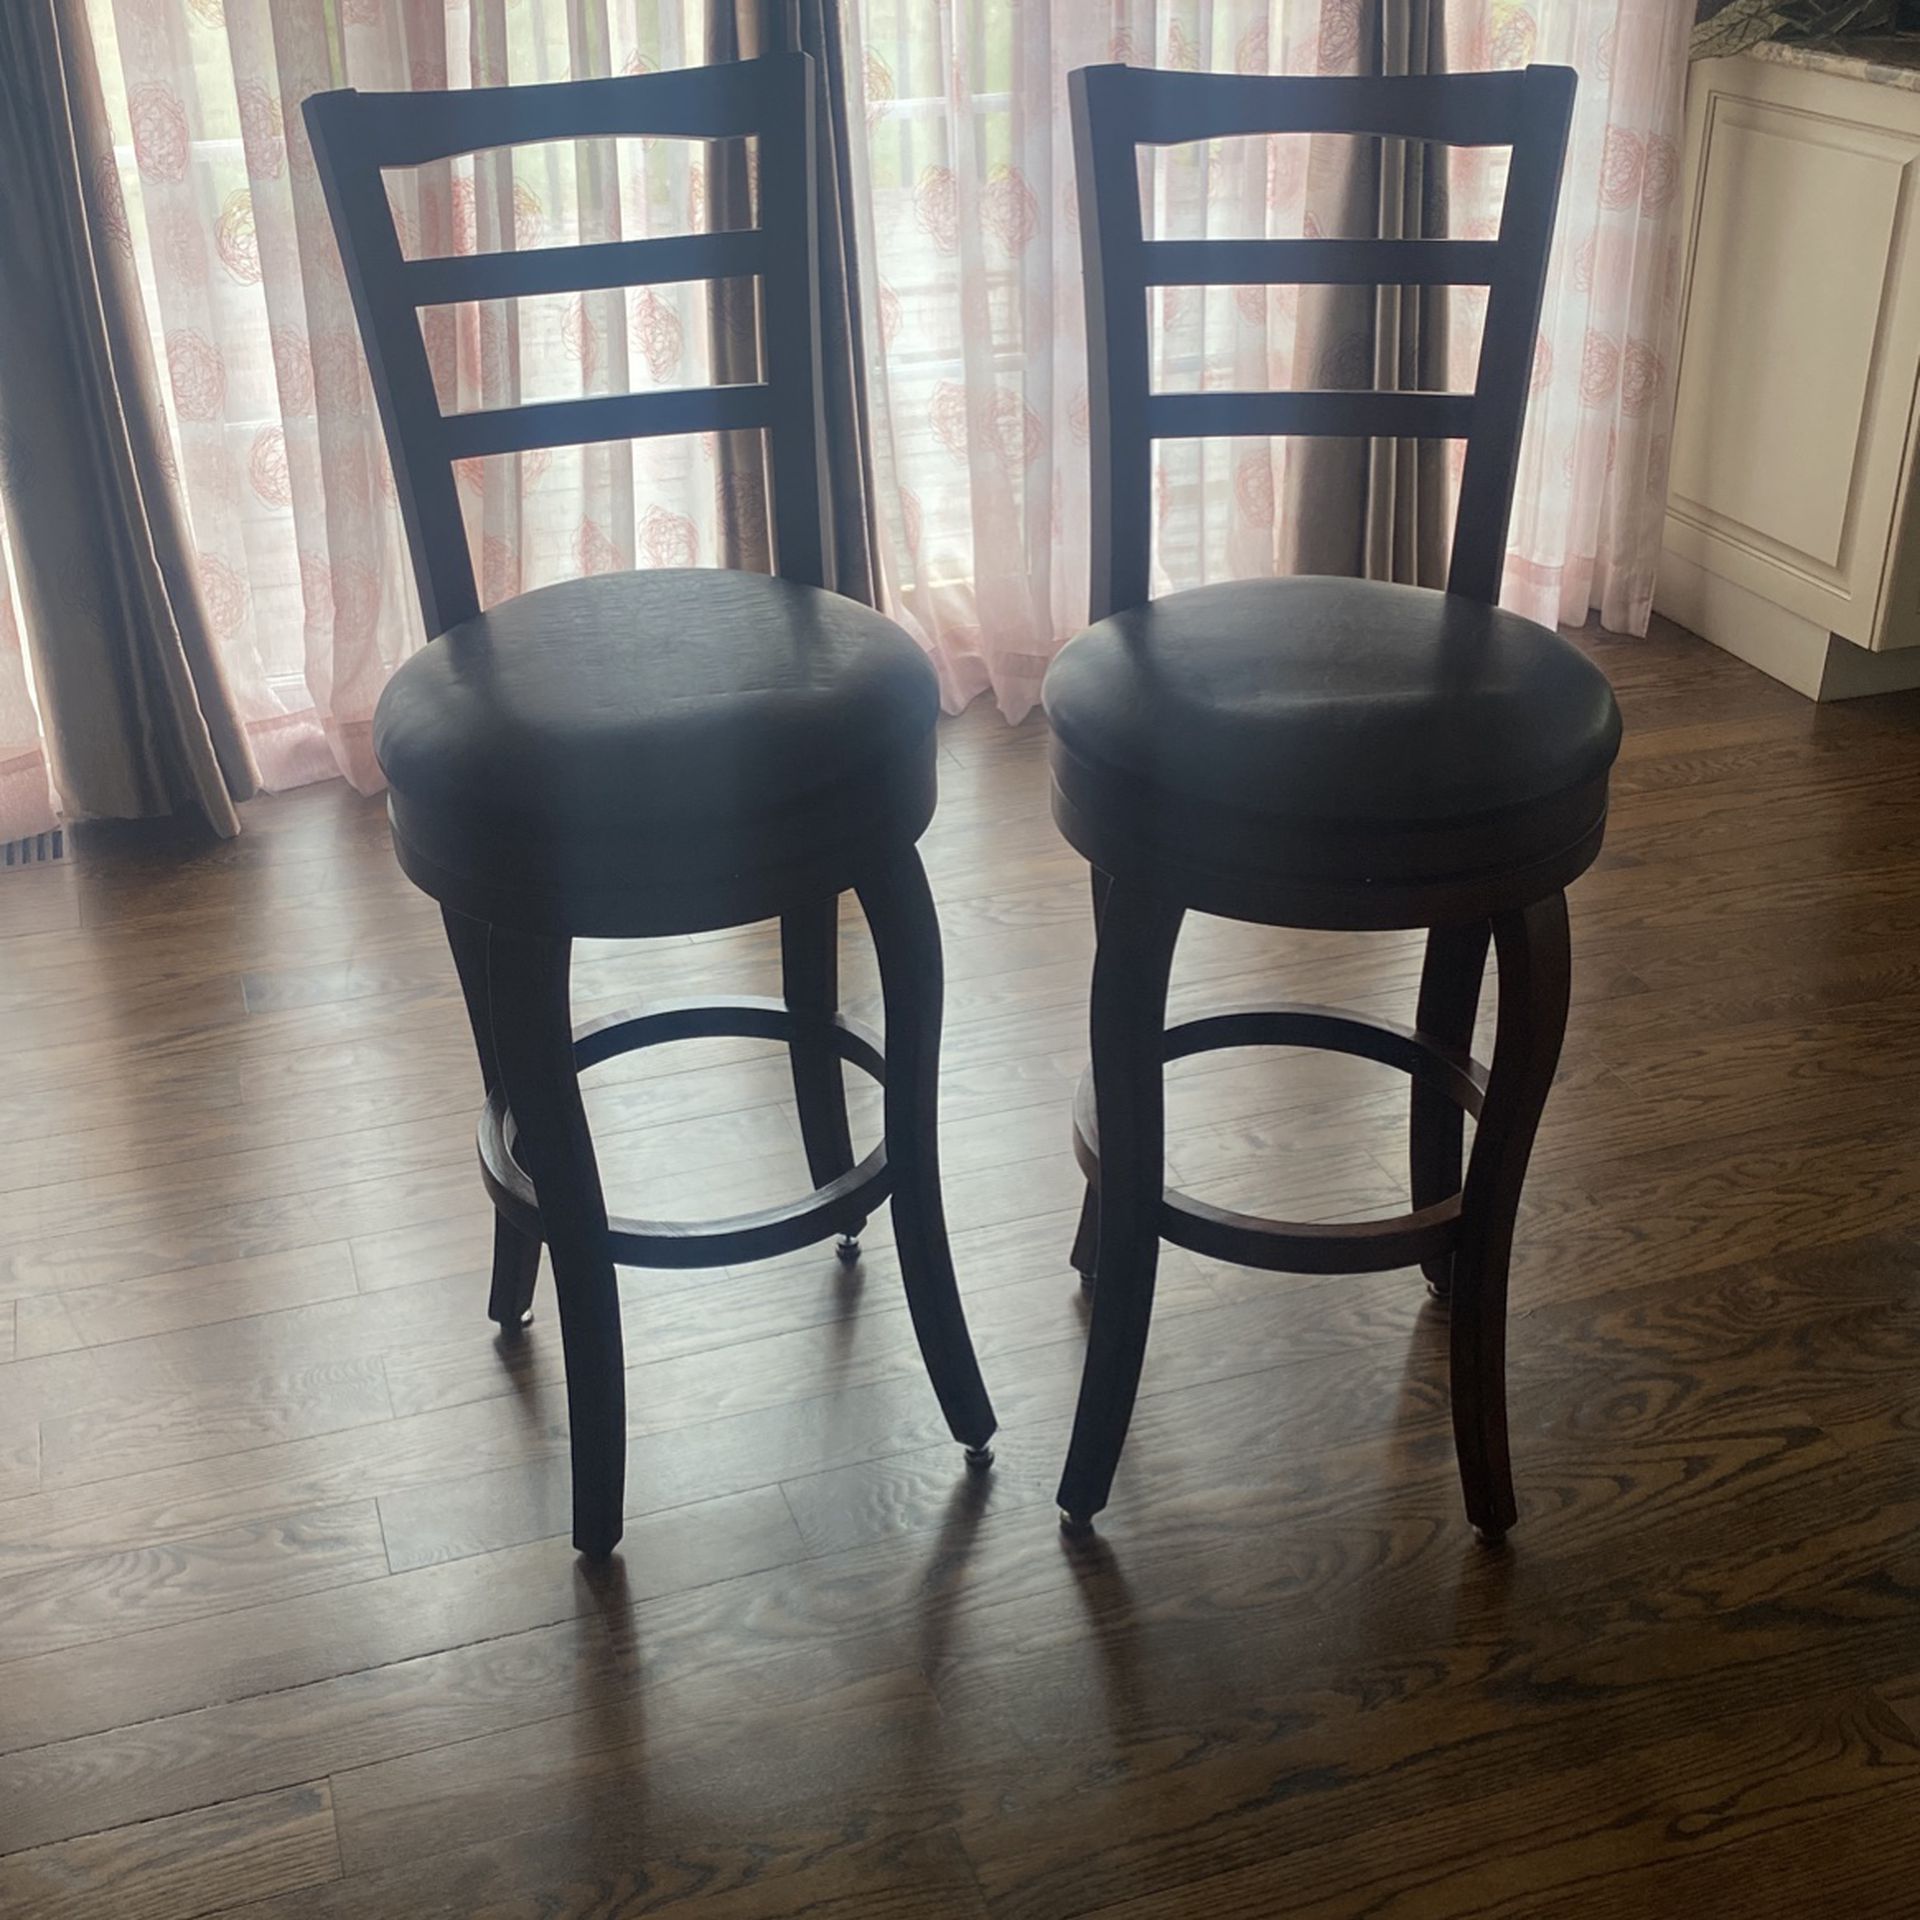 Two Counter High Bar Chairs